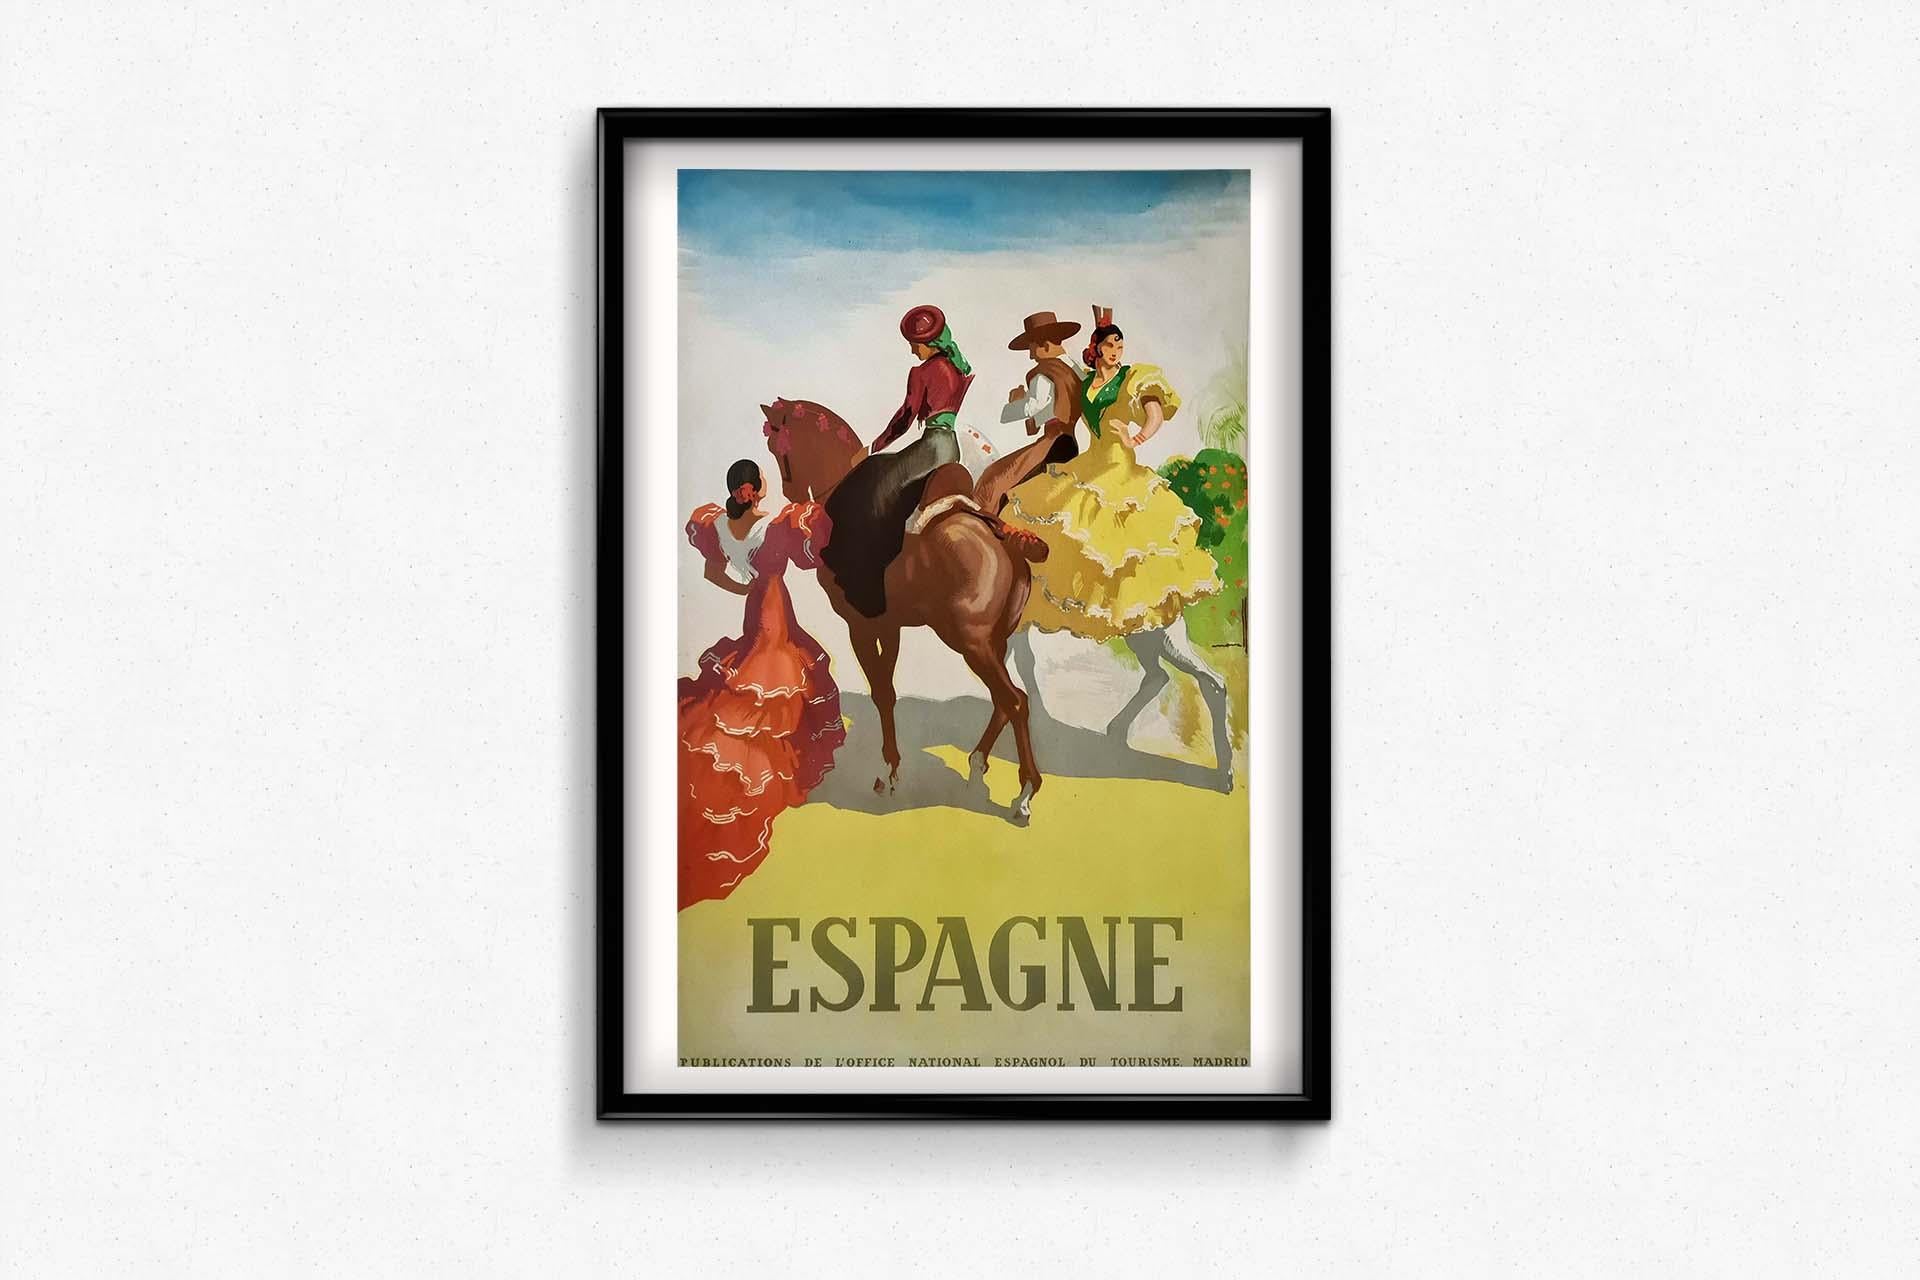 The circa 1950 original travel poster by Morell showcasing Spain, with its depiction of cavaliers, captures the essence of adventure and romance synonymous with travel to this vibrant destination. This poster, created during the mid-20th century,